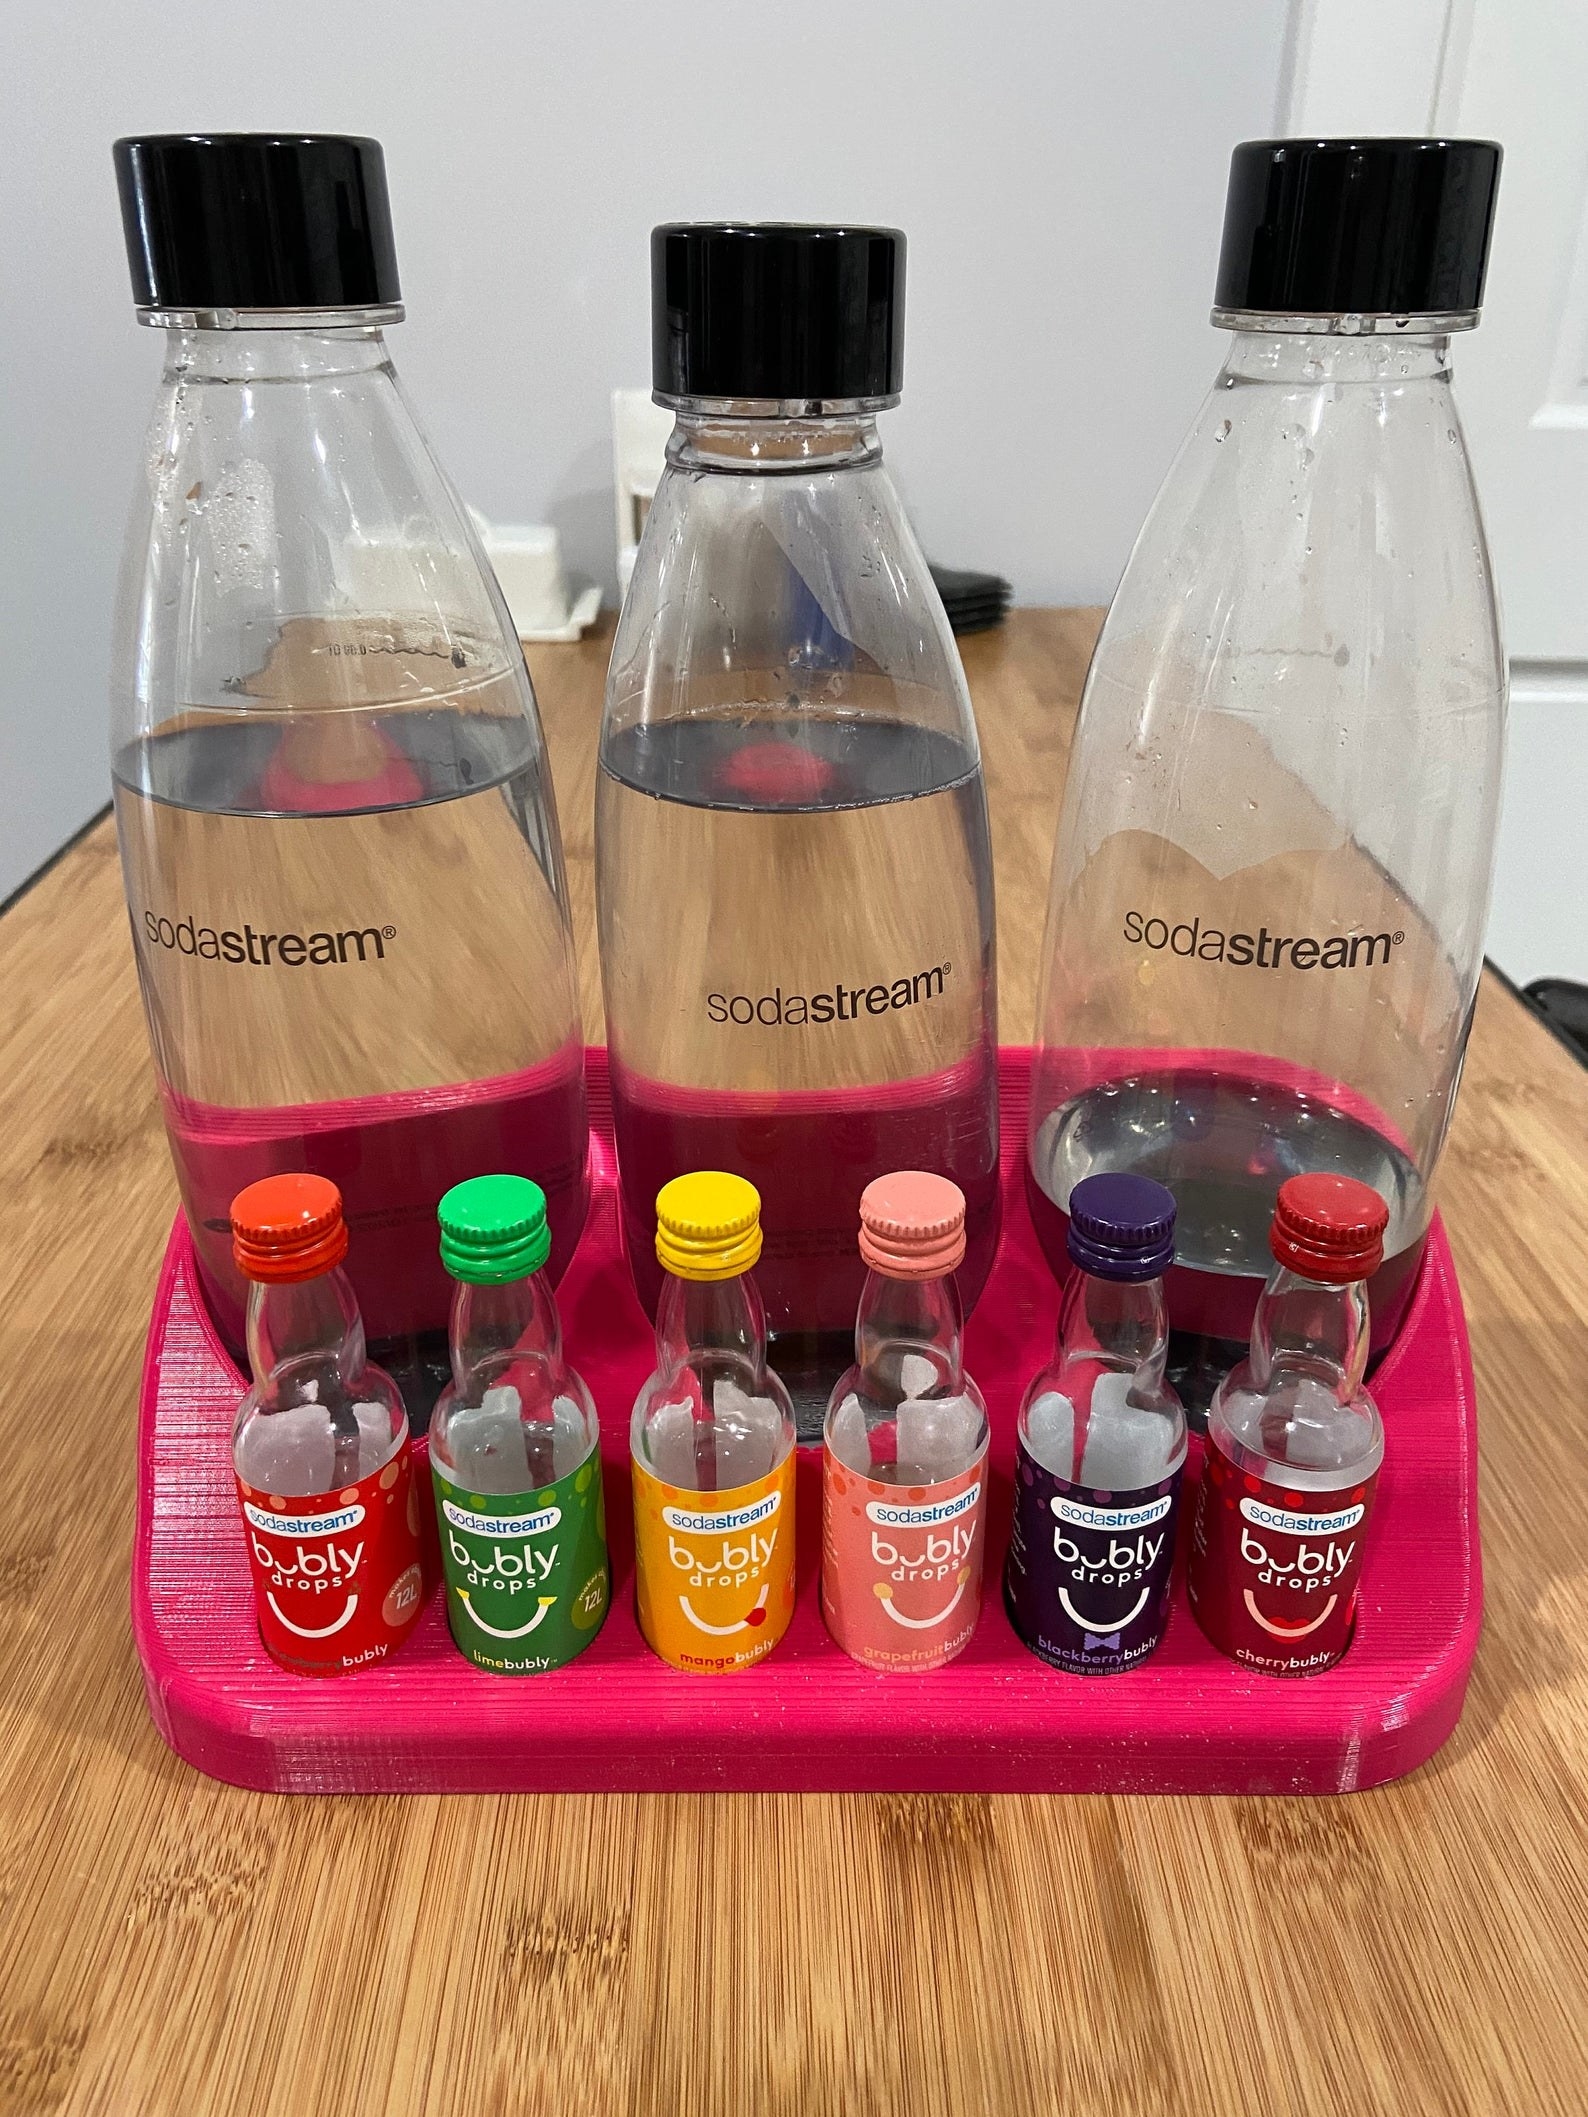 holder with three sodastream bottles and six flavor bottles